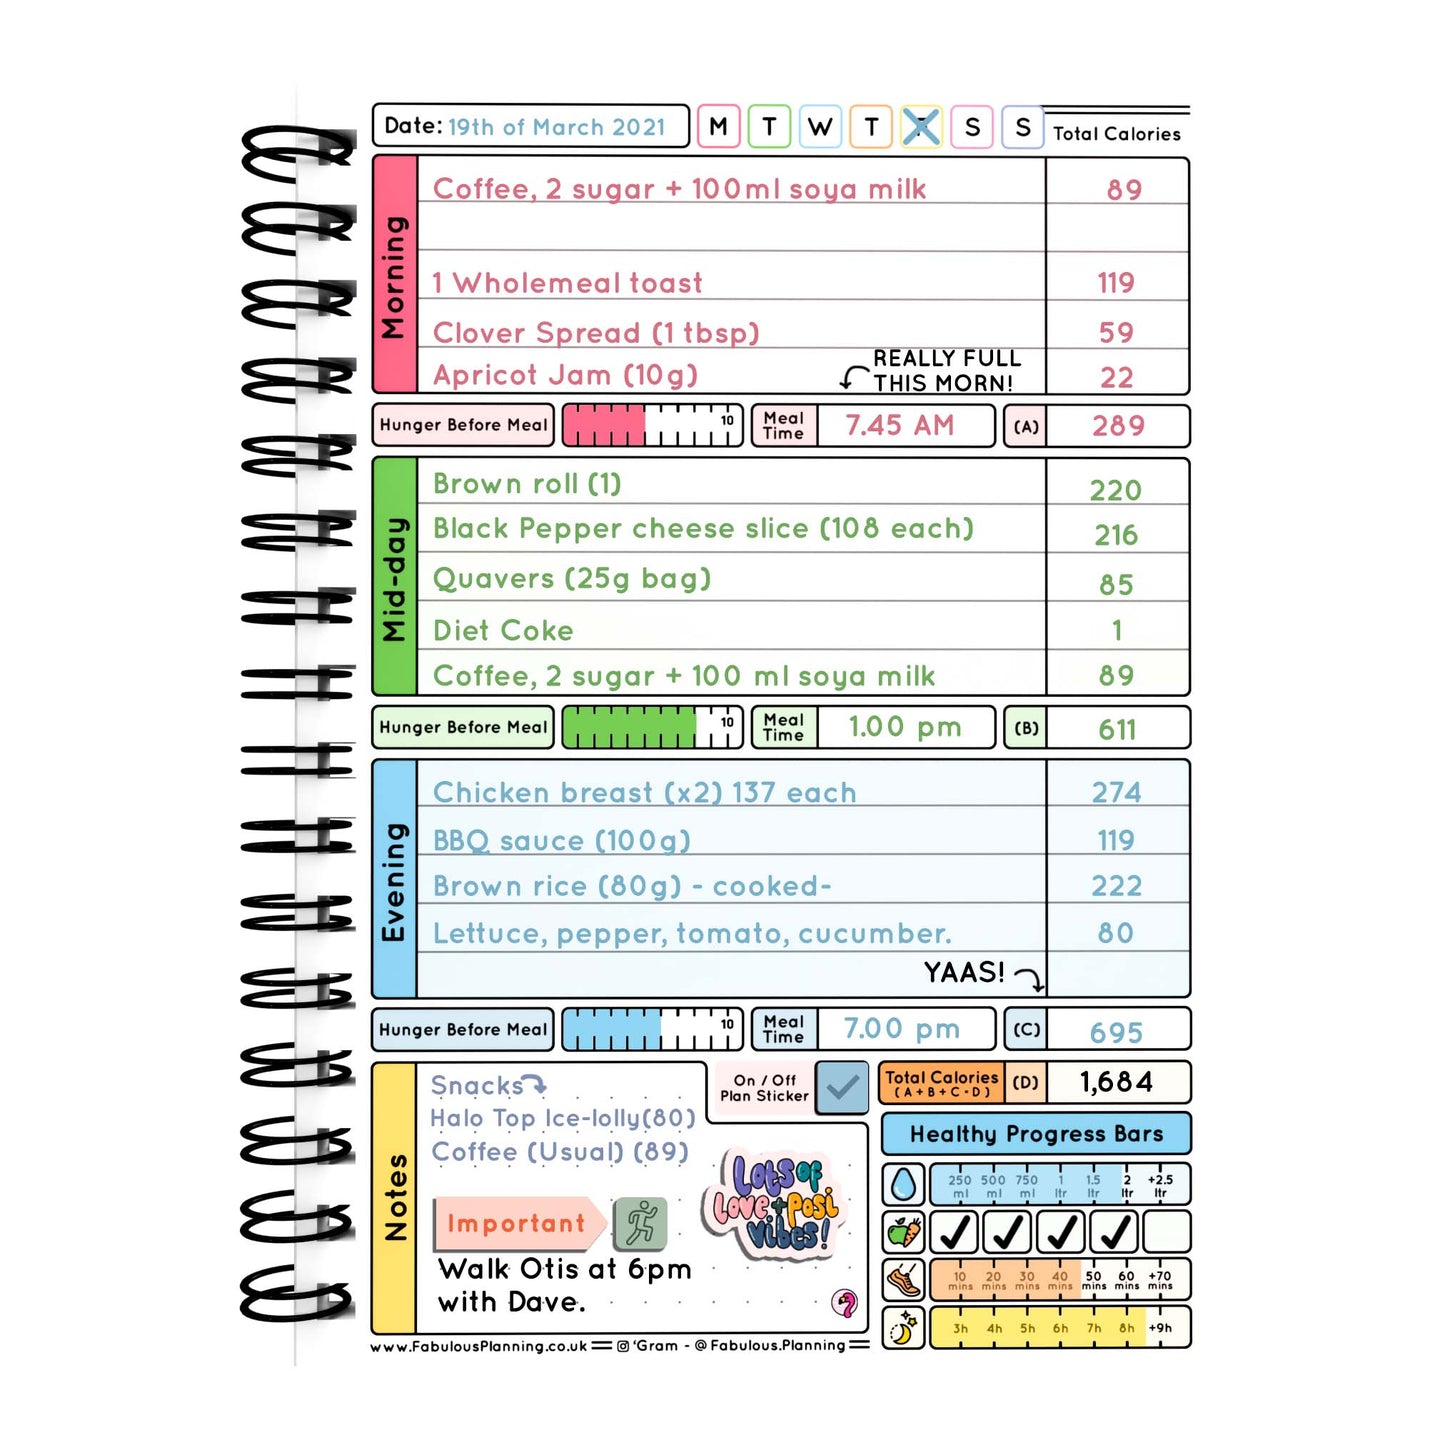 Food Diary - C71 - Calorie Counting